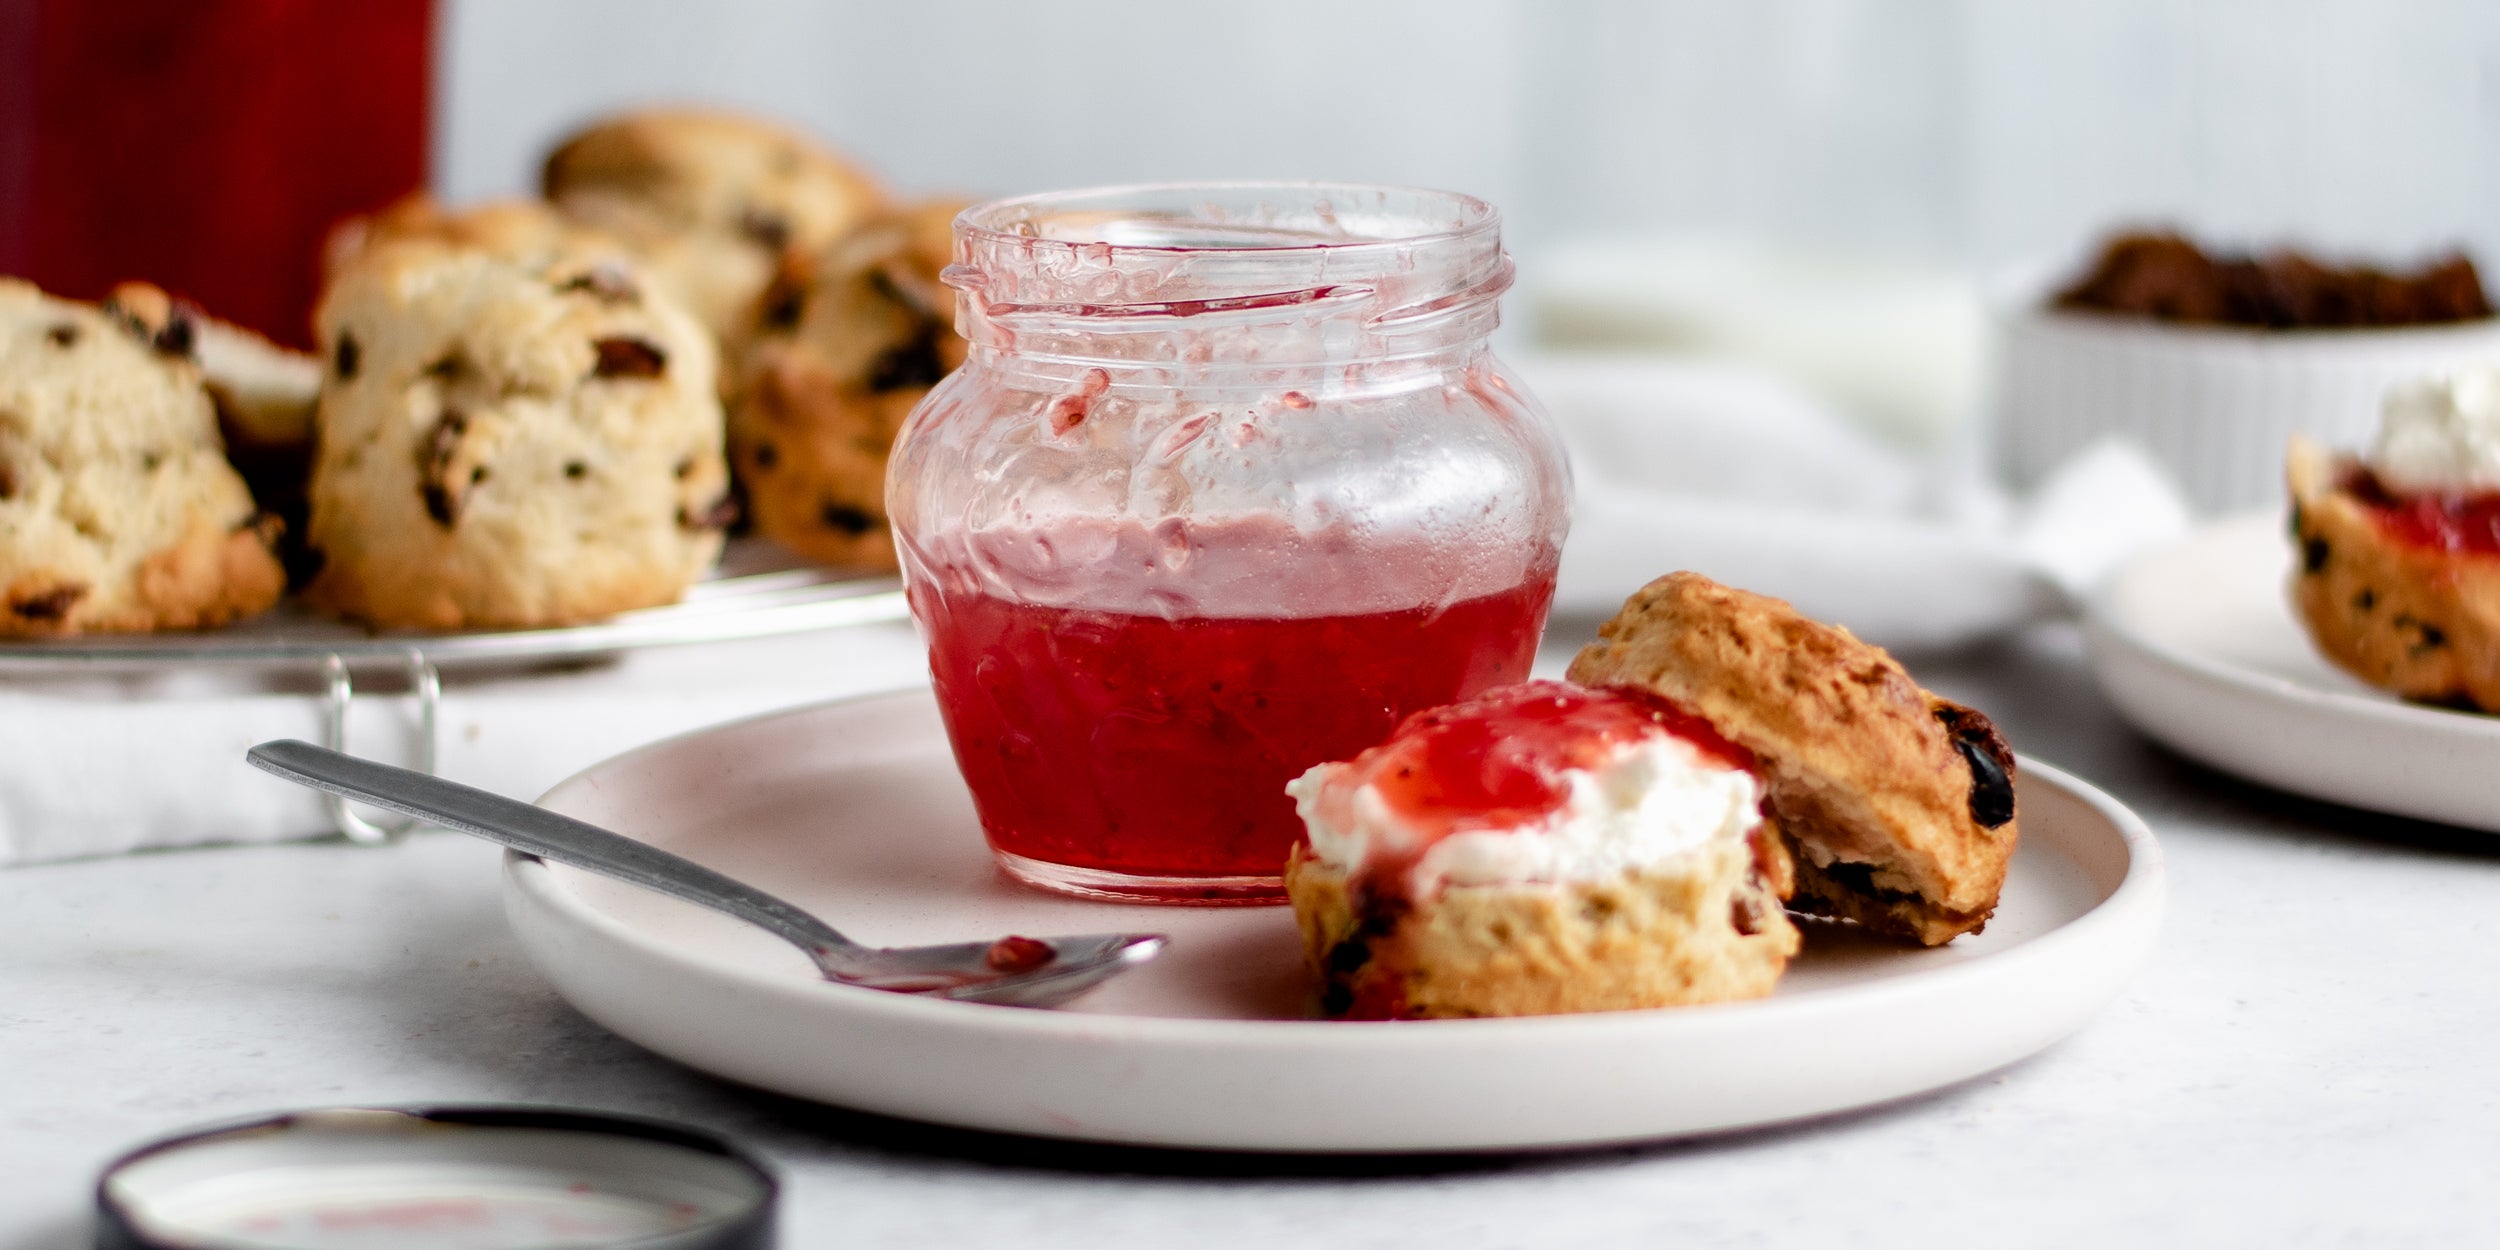 Close up of Strawberry Jam next to a scone sliced in half smothered with cream and jam